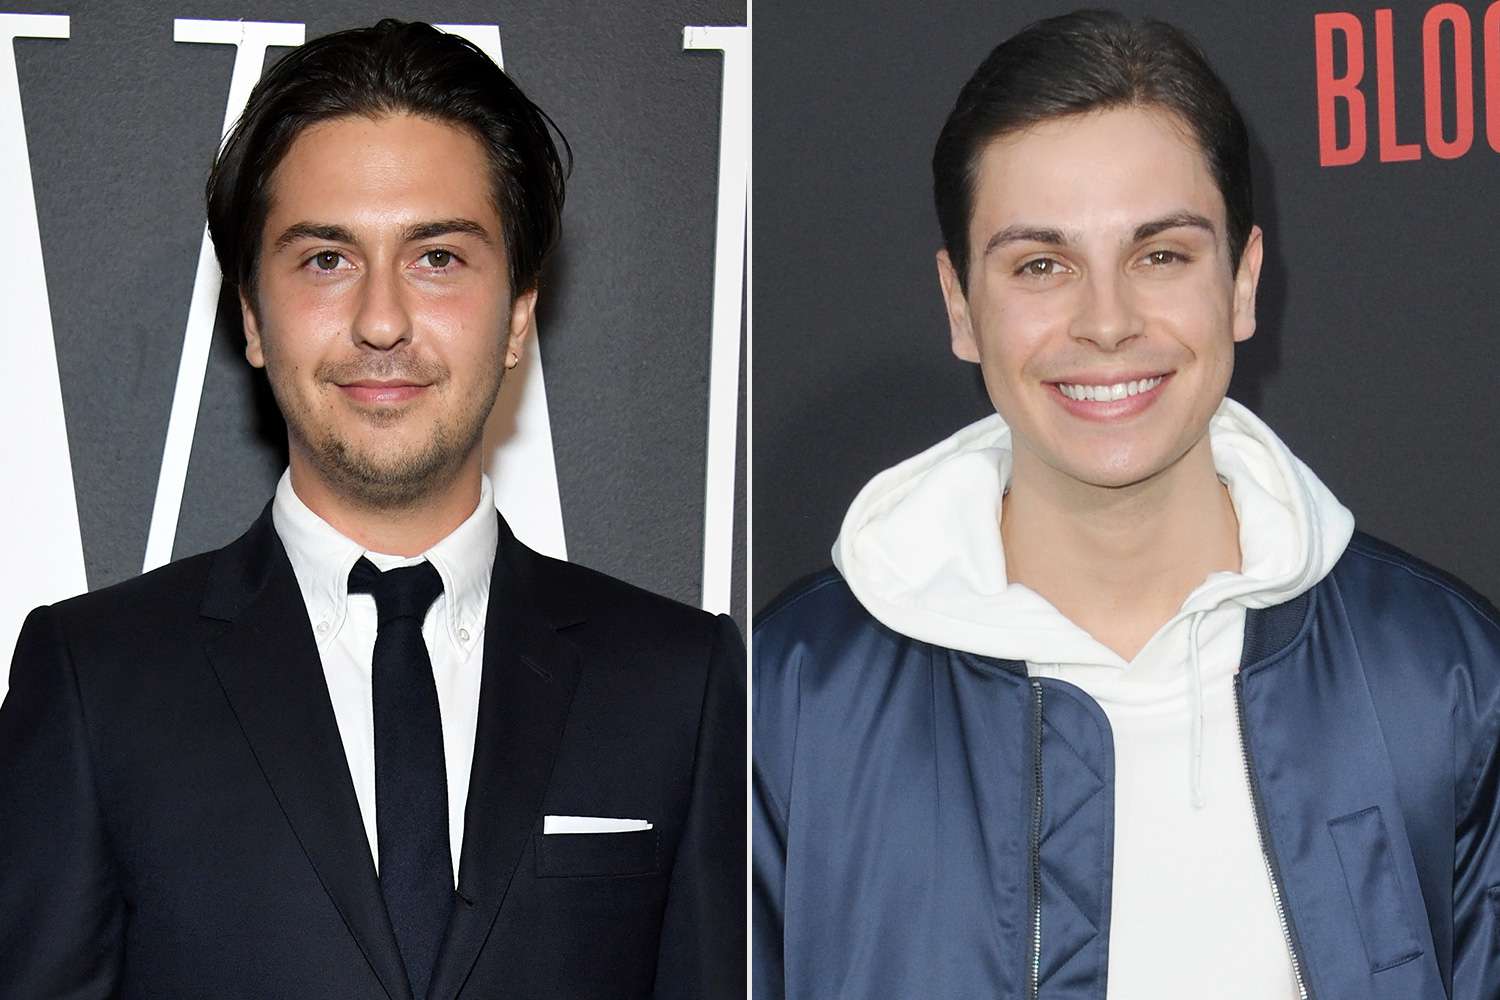 Nat Wolff Says He Peed in a Cup to Help Jake T. Austin Pass a Drug Test When They Were Teens